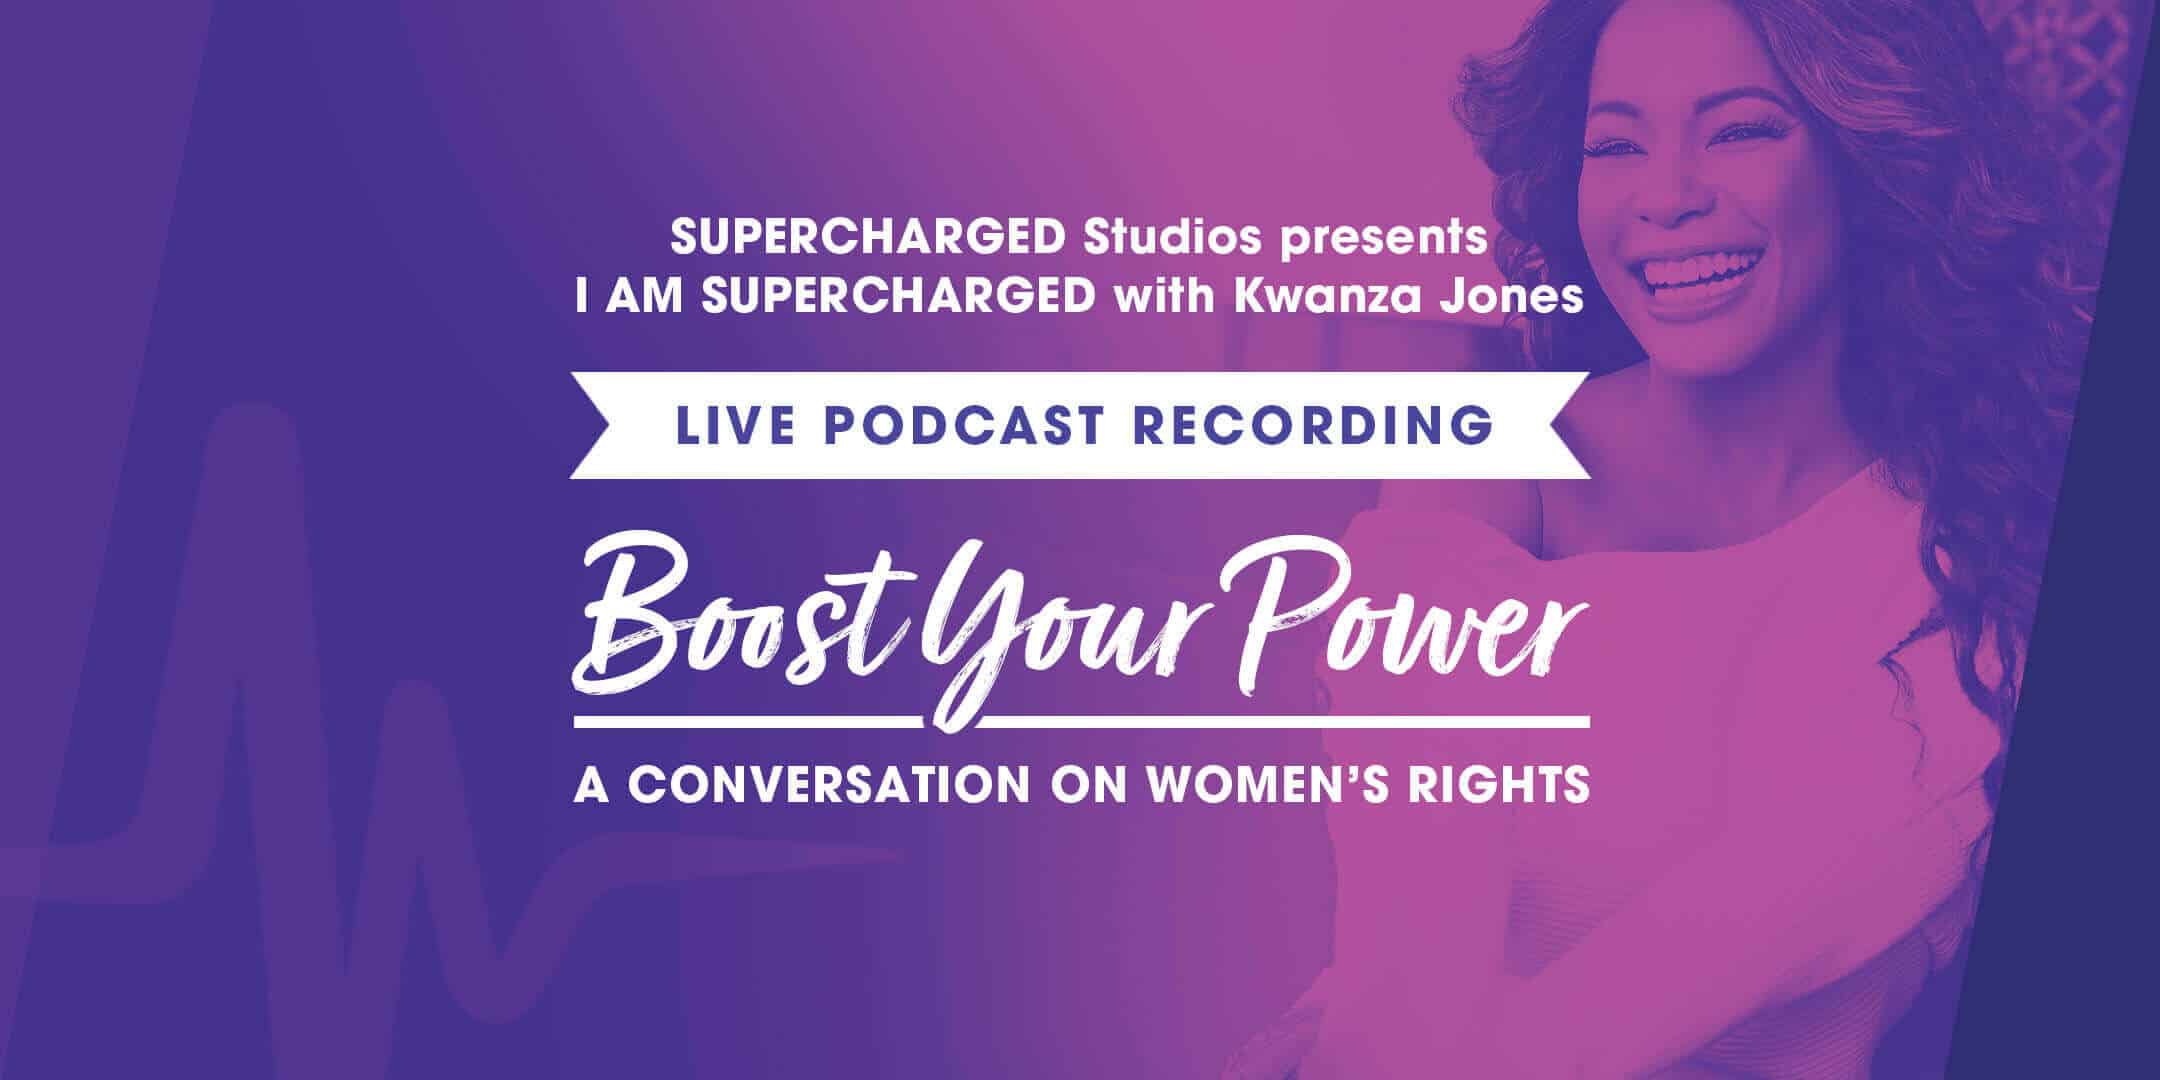 SBKJ - Live Podcast Recording Boost Your Power